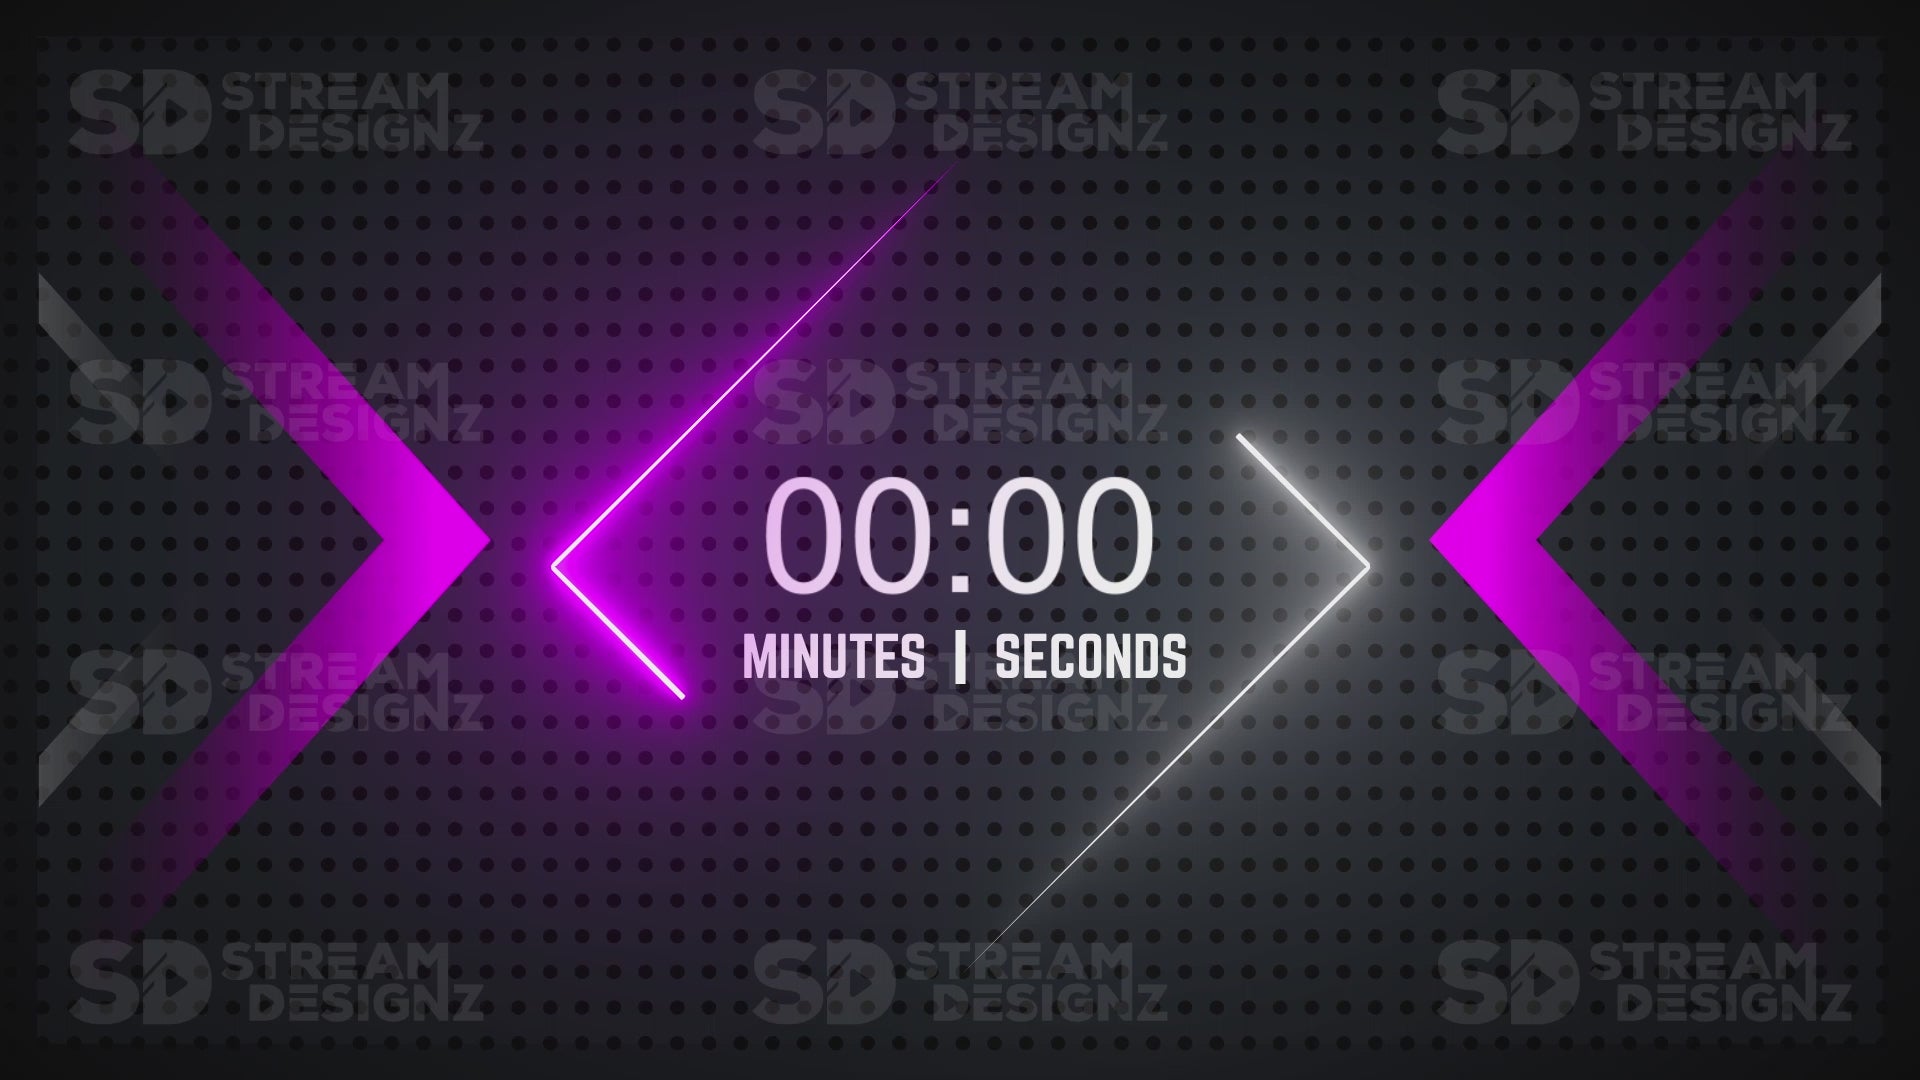 5 minute count up timer preview video pink fury stream designz